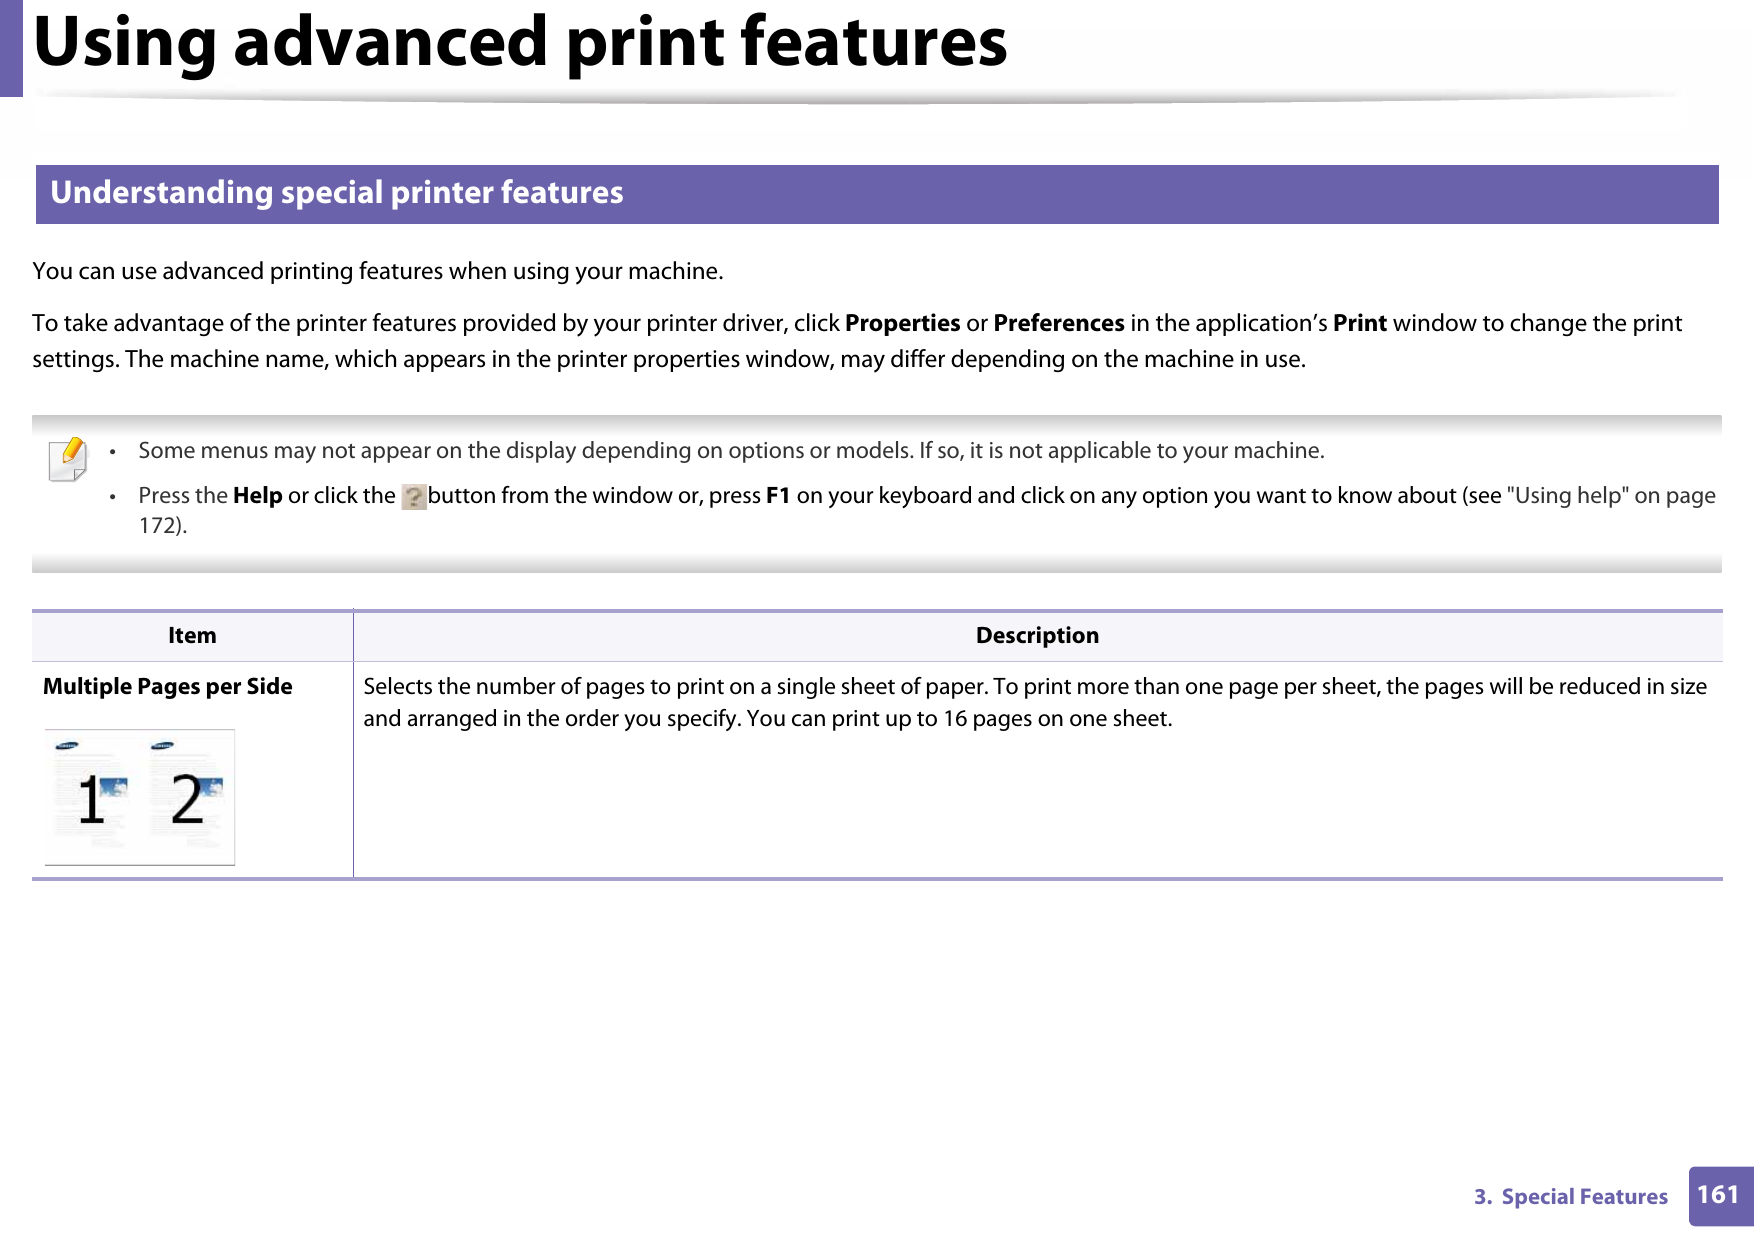 Using advanced print features1613.  Special Features2 Understanding special printer featuresYou can use advanced printing features when using your machine.To take advantage of the printer features provided by your printer driver, click Properties or Preferences in the application’s Print window to change the print settings. The machine name, which appears in the printer properties window, may differ depending on the machine in use. • Some menus may not appear on the display depending on options or models. If so, it is not applicable to your machine.• Press the Help or click the  button from the window or, press F1 on your keyboard and click on any option you want to know about (see &quot;Using help&quot; on page 172).  Item DescriptionMultiple Pages per Side Selects the number of pages to print on a single sheet of paper. To print more than one page per sheet, the pages will be reduced in size and arranged in the order you specify. You can print up to 16 pages on one sheet. 